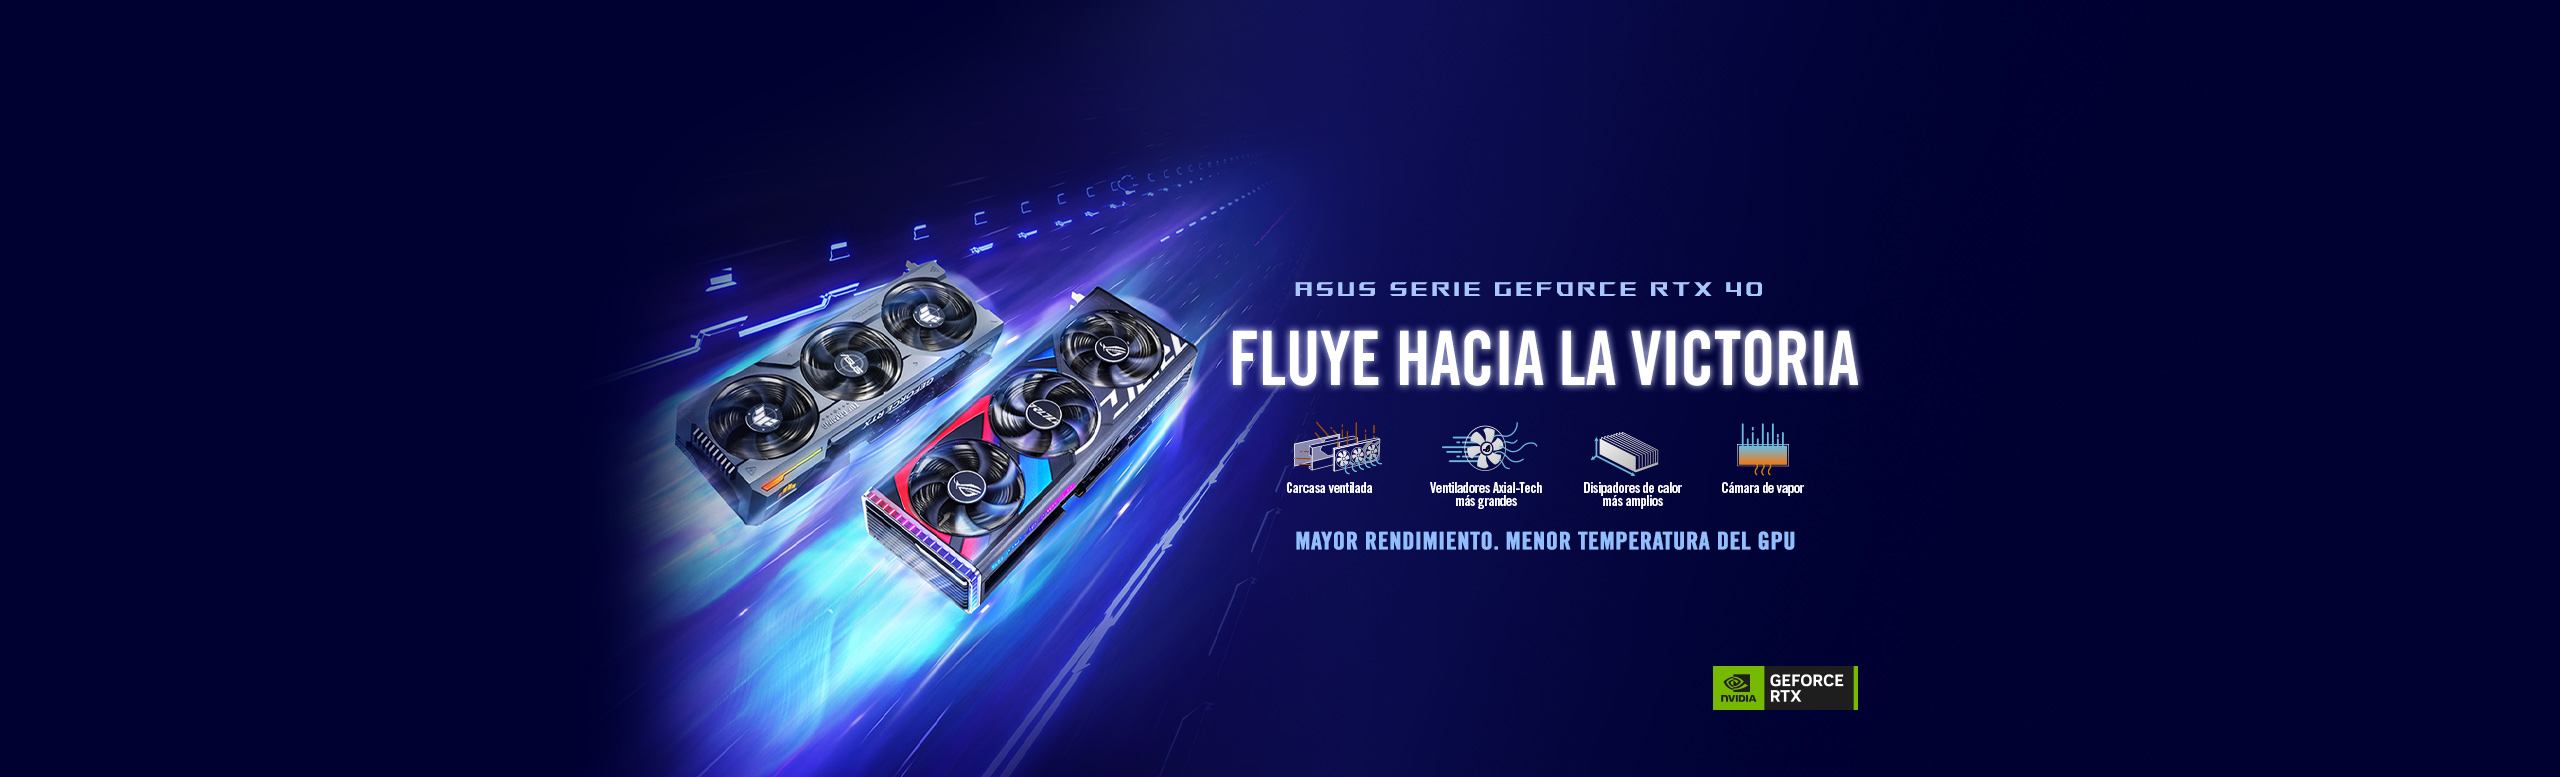 ASUS Serie RTX 40